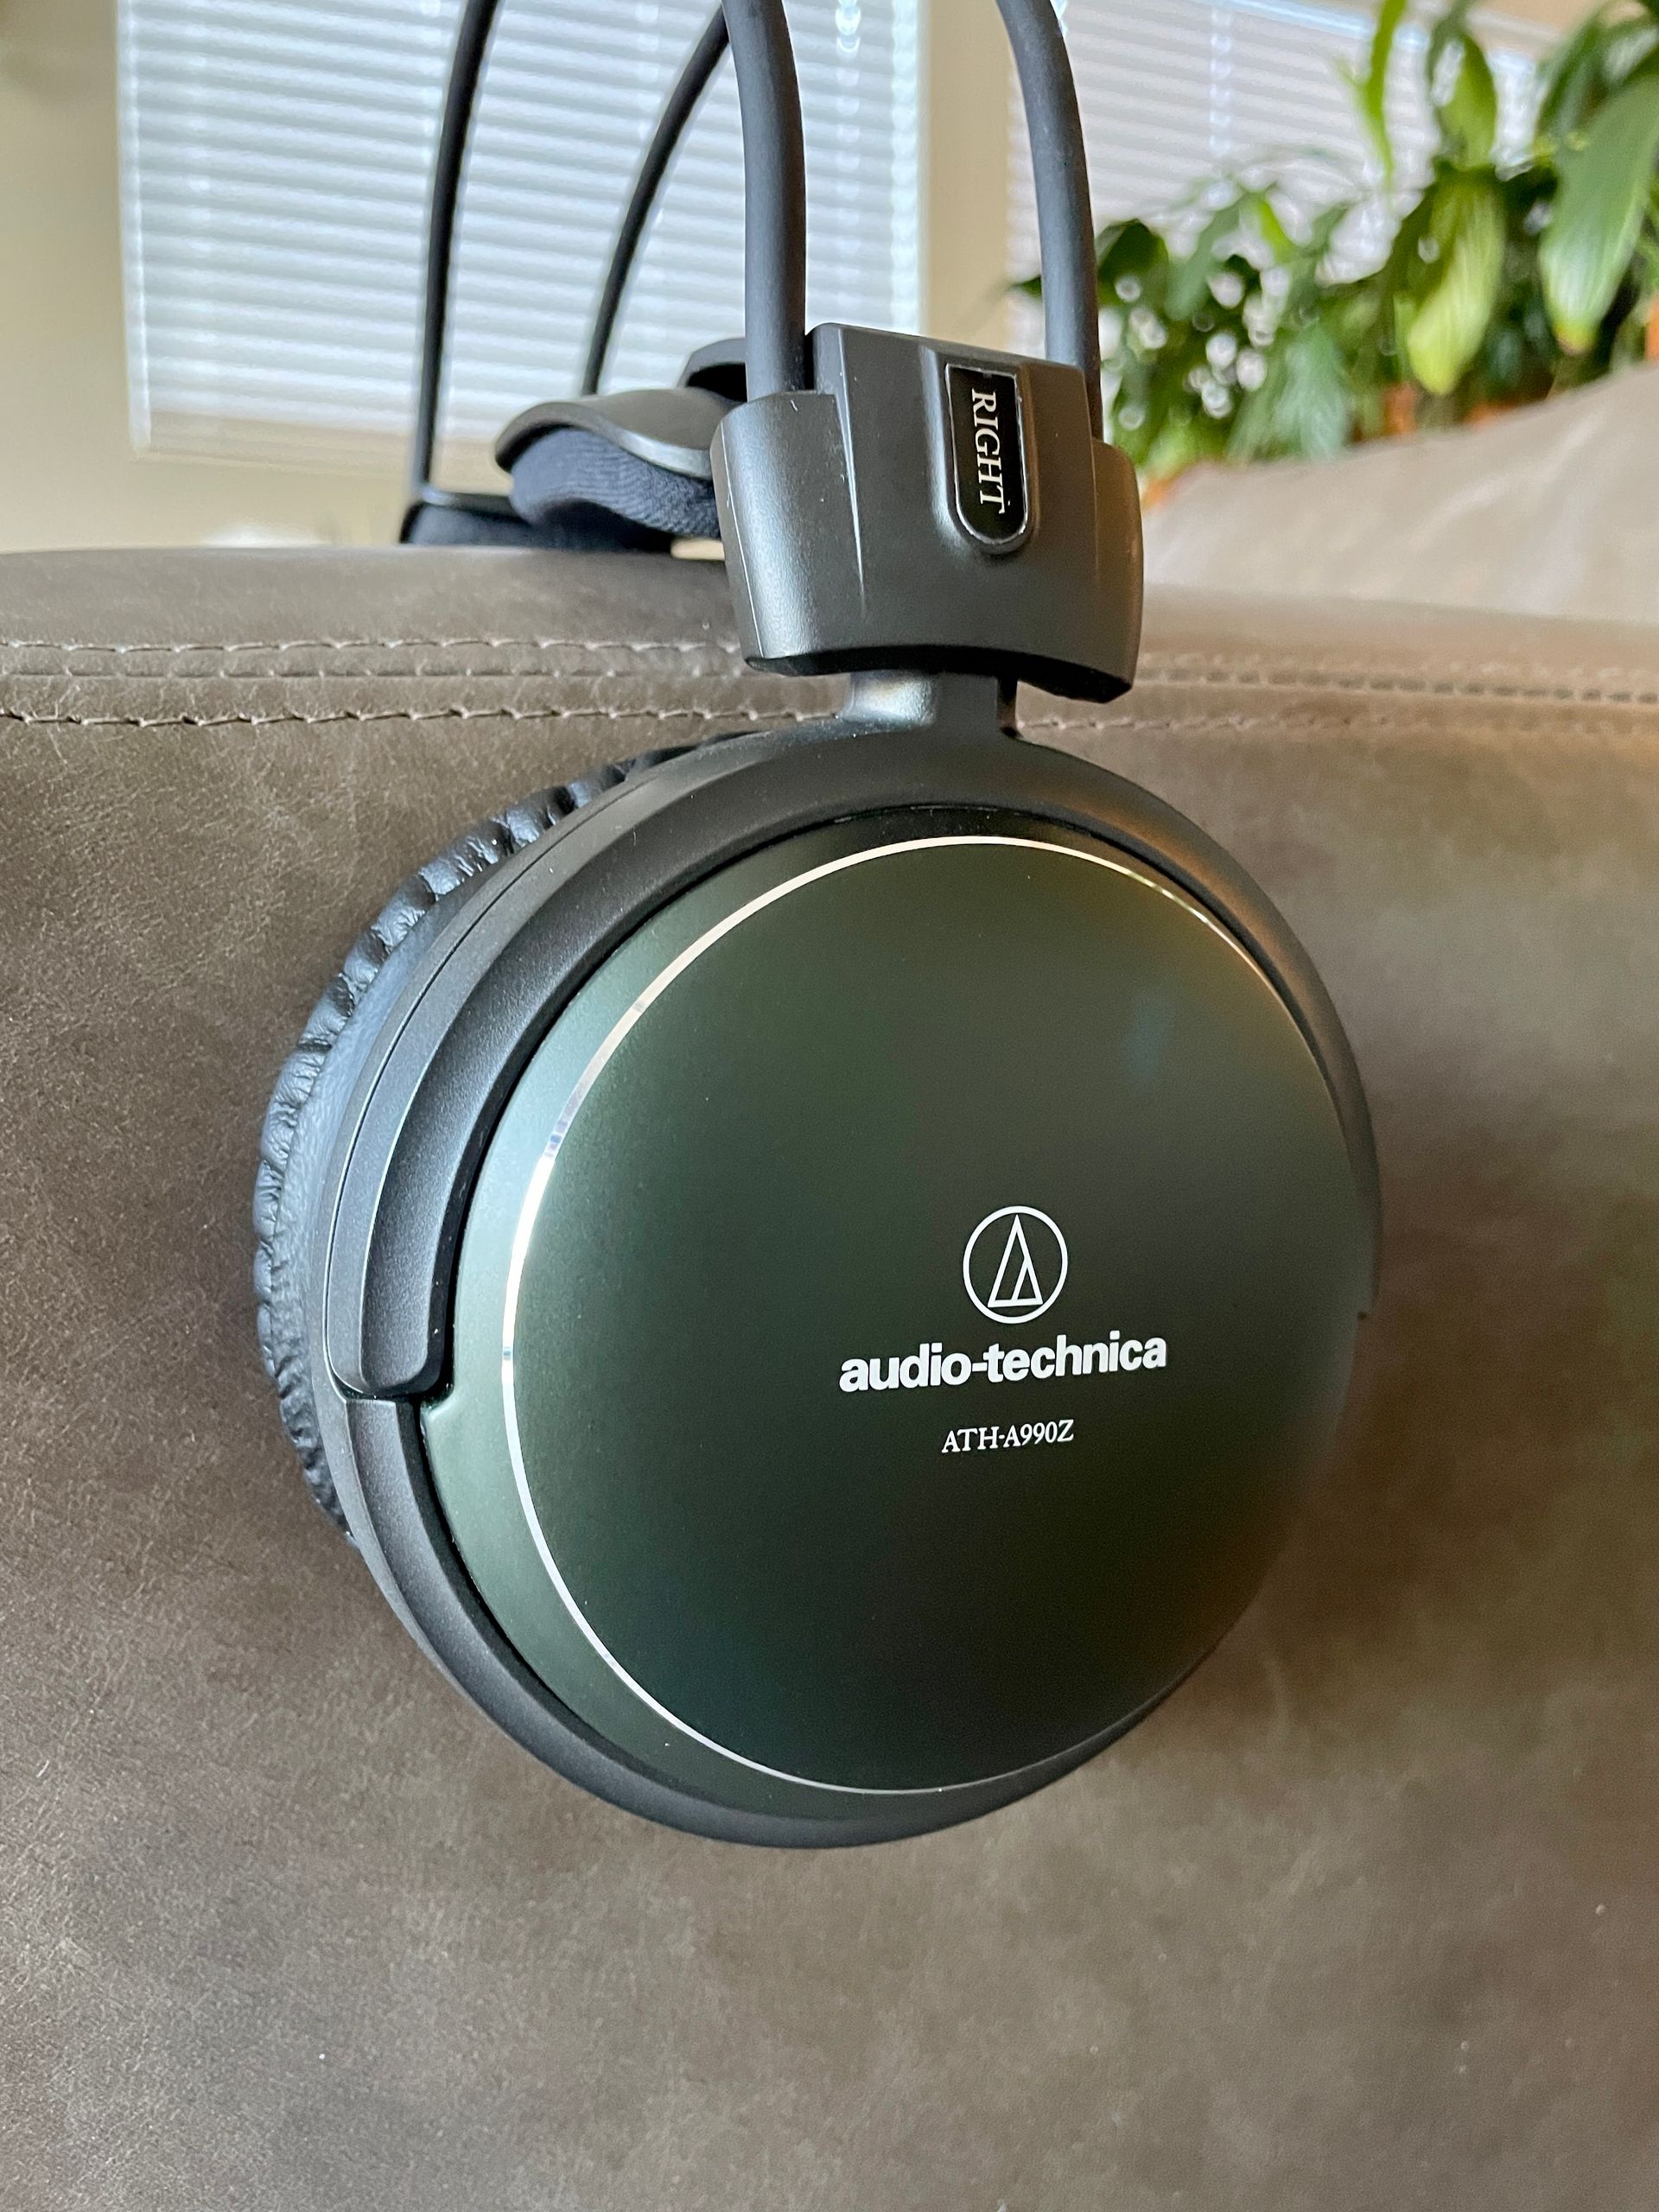 A Review of the Audio Technica ATH-A990Z